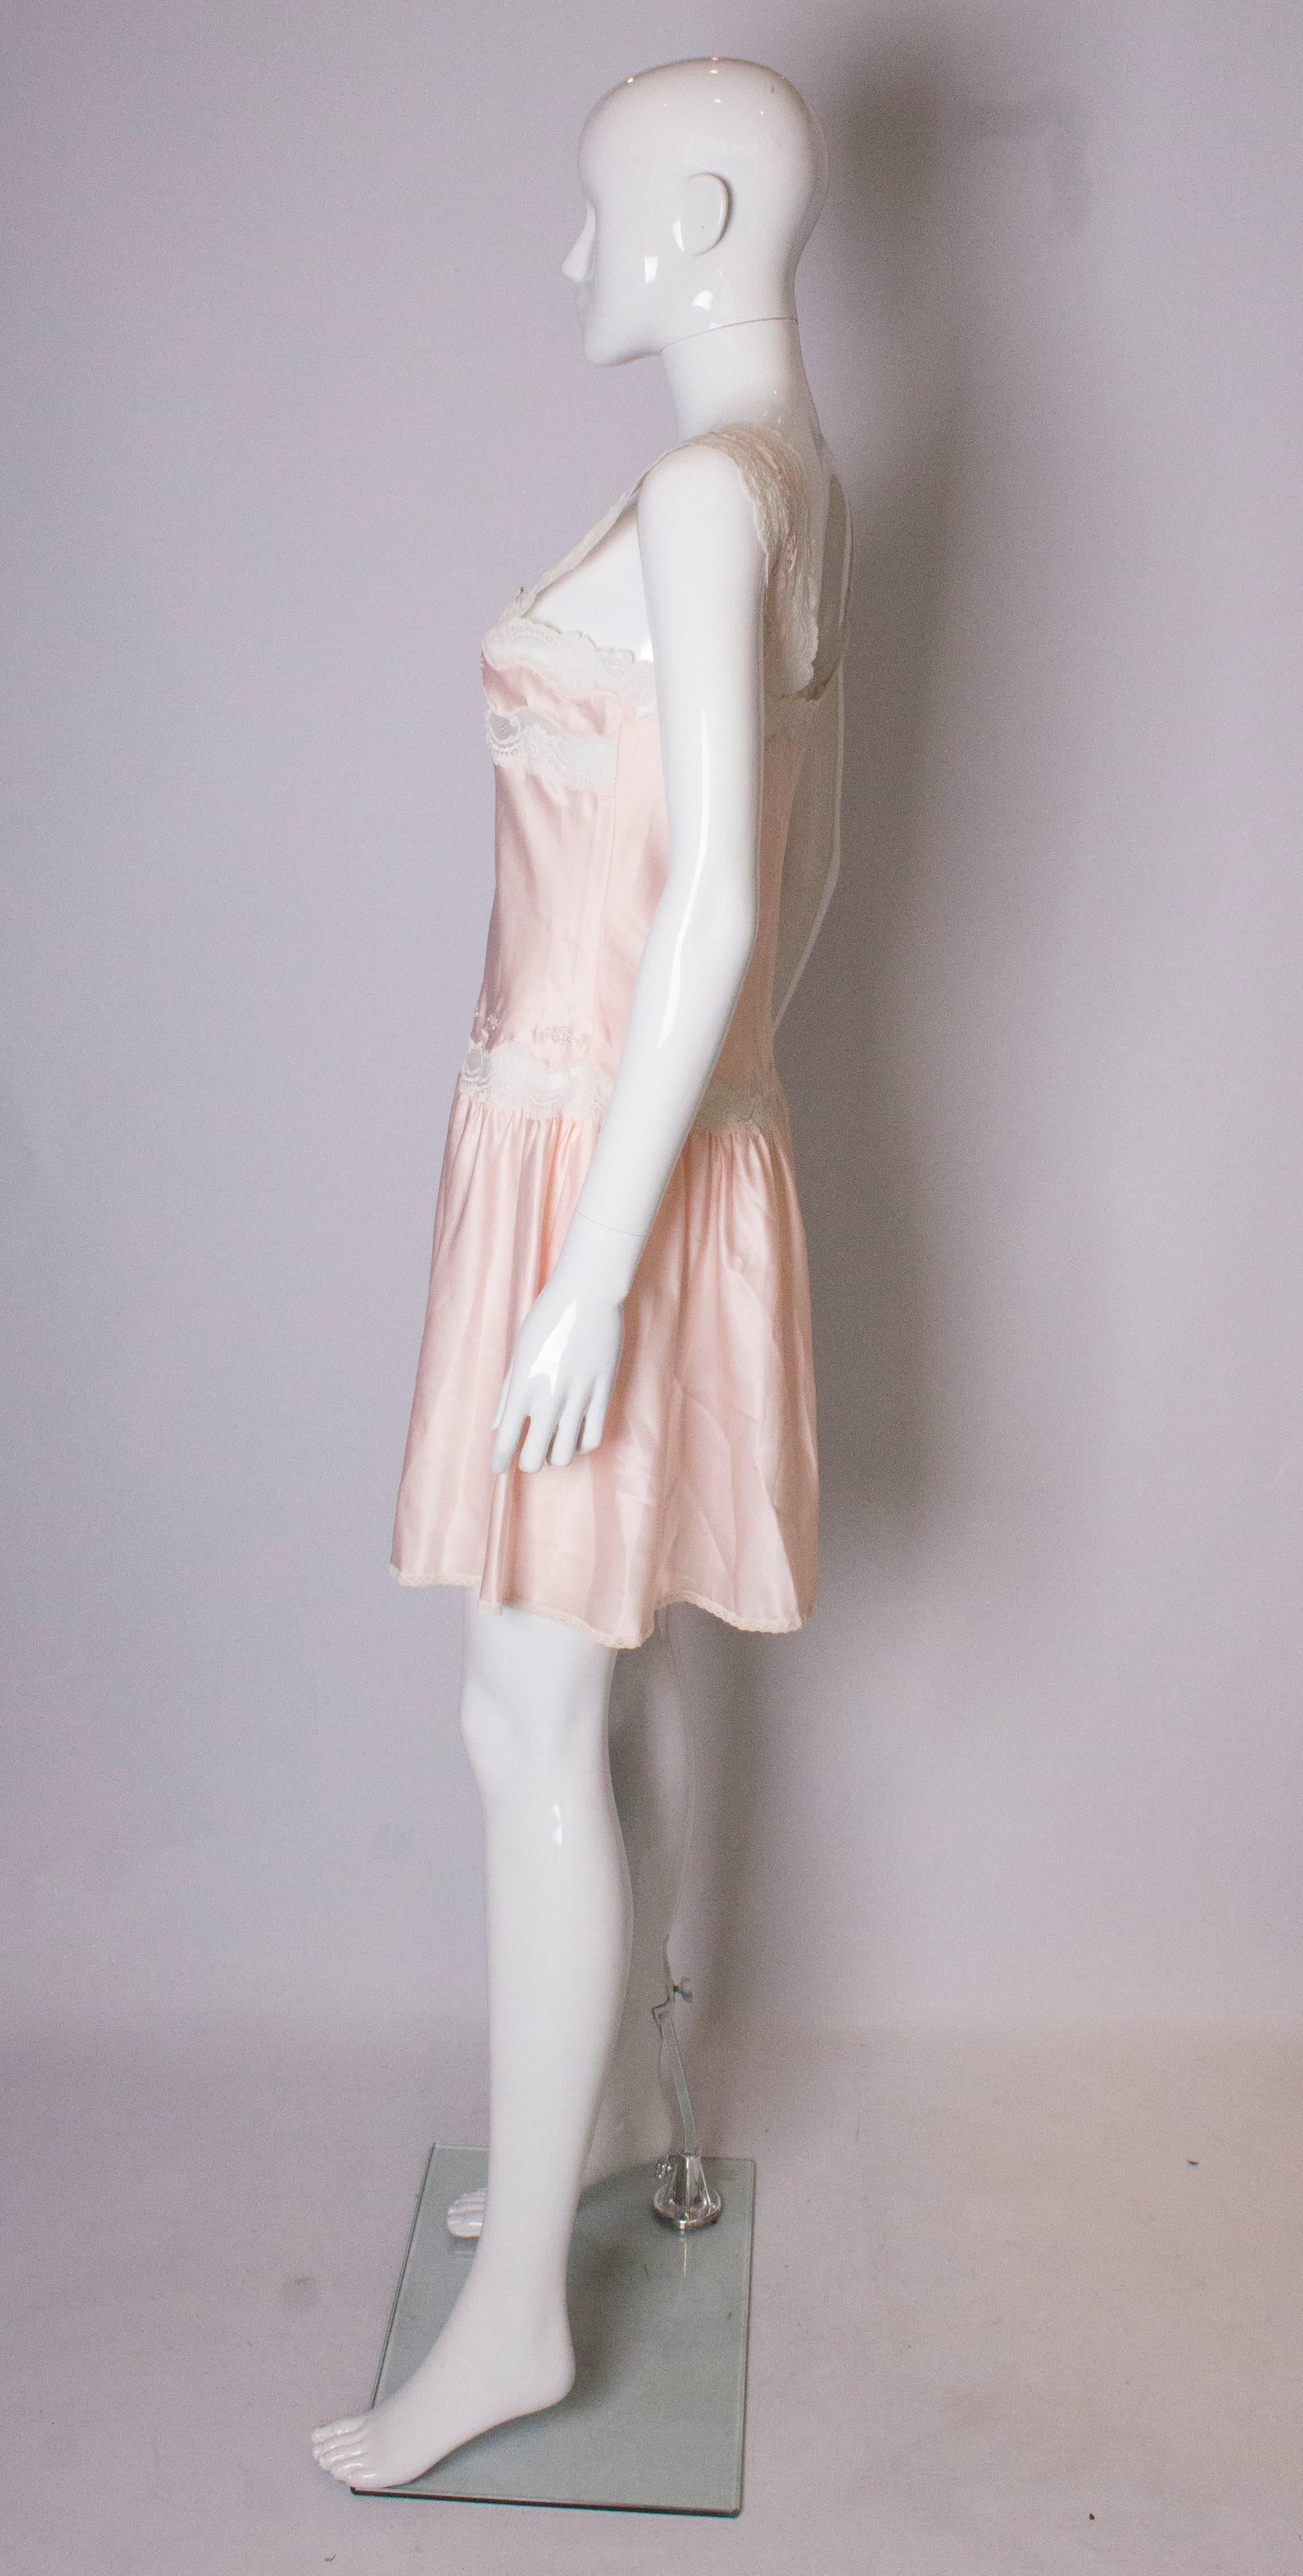 Women's Vintage Pink Nightdress /Dress with Lace Detail